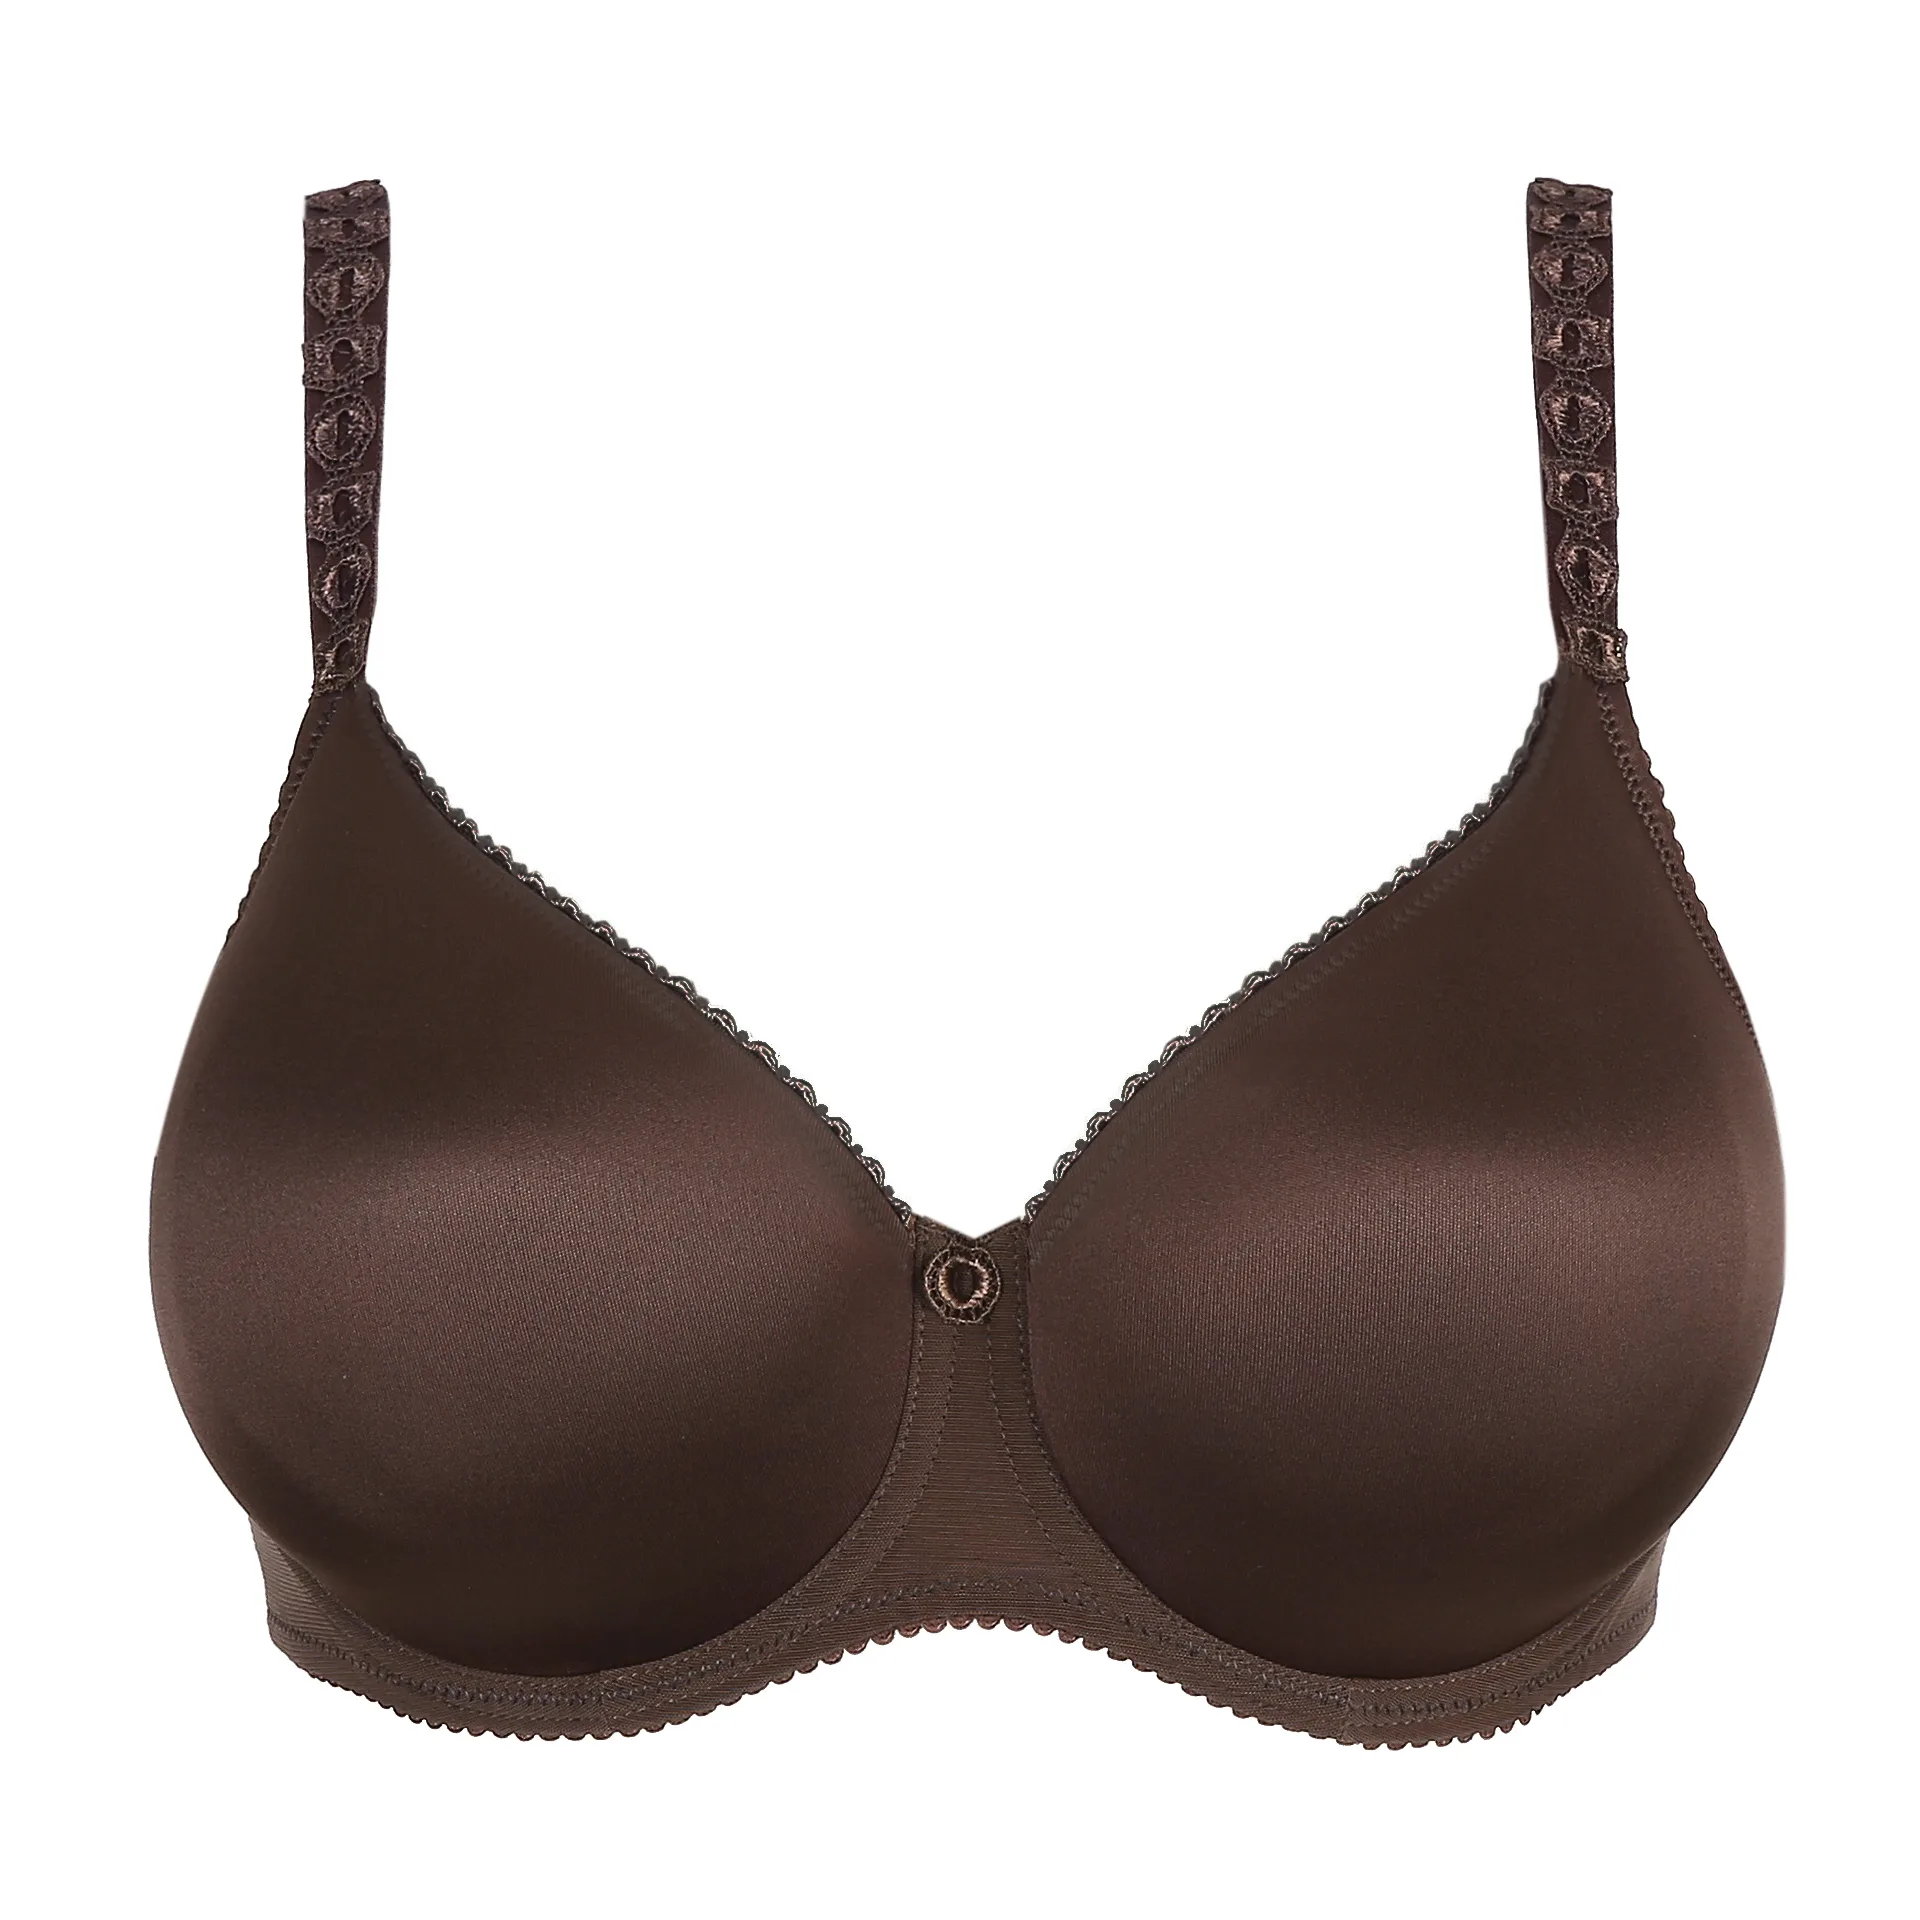 PRIMA DONNA Ebony Every Woman Spacer Full Cup Bra, US 32G, UK 32F, NWOT